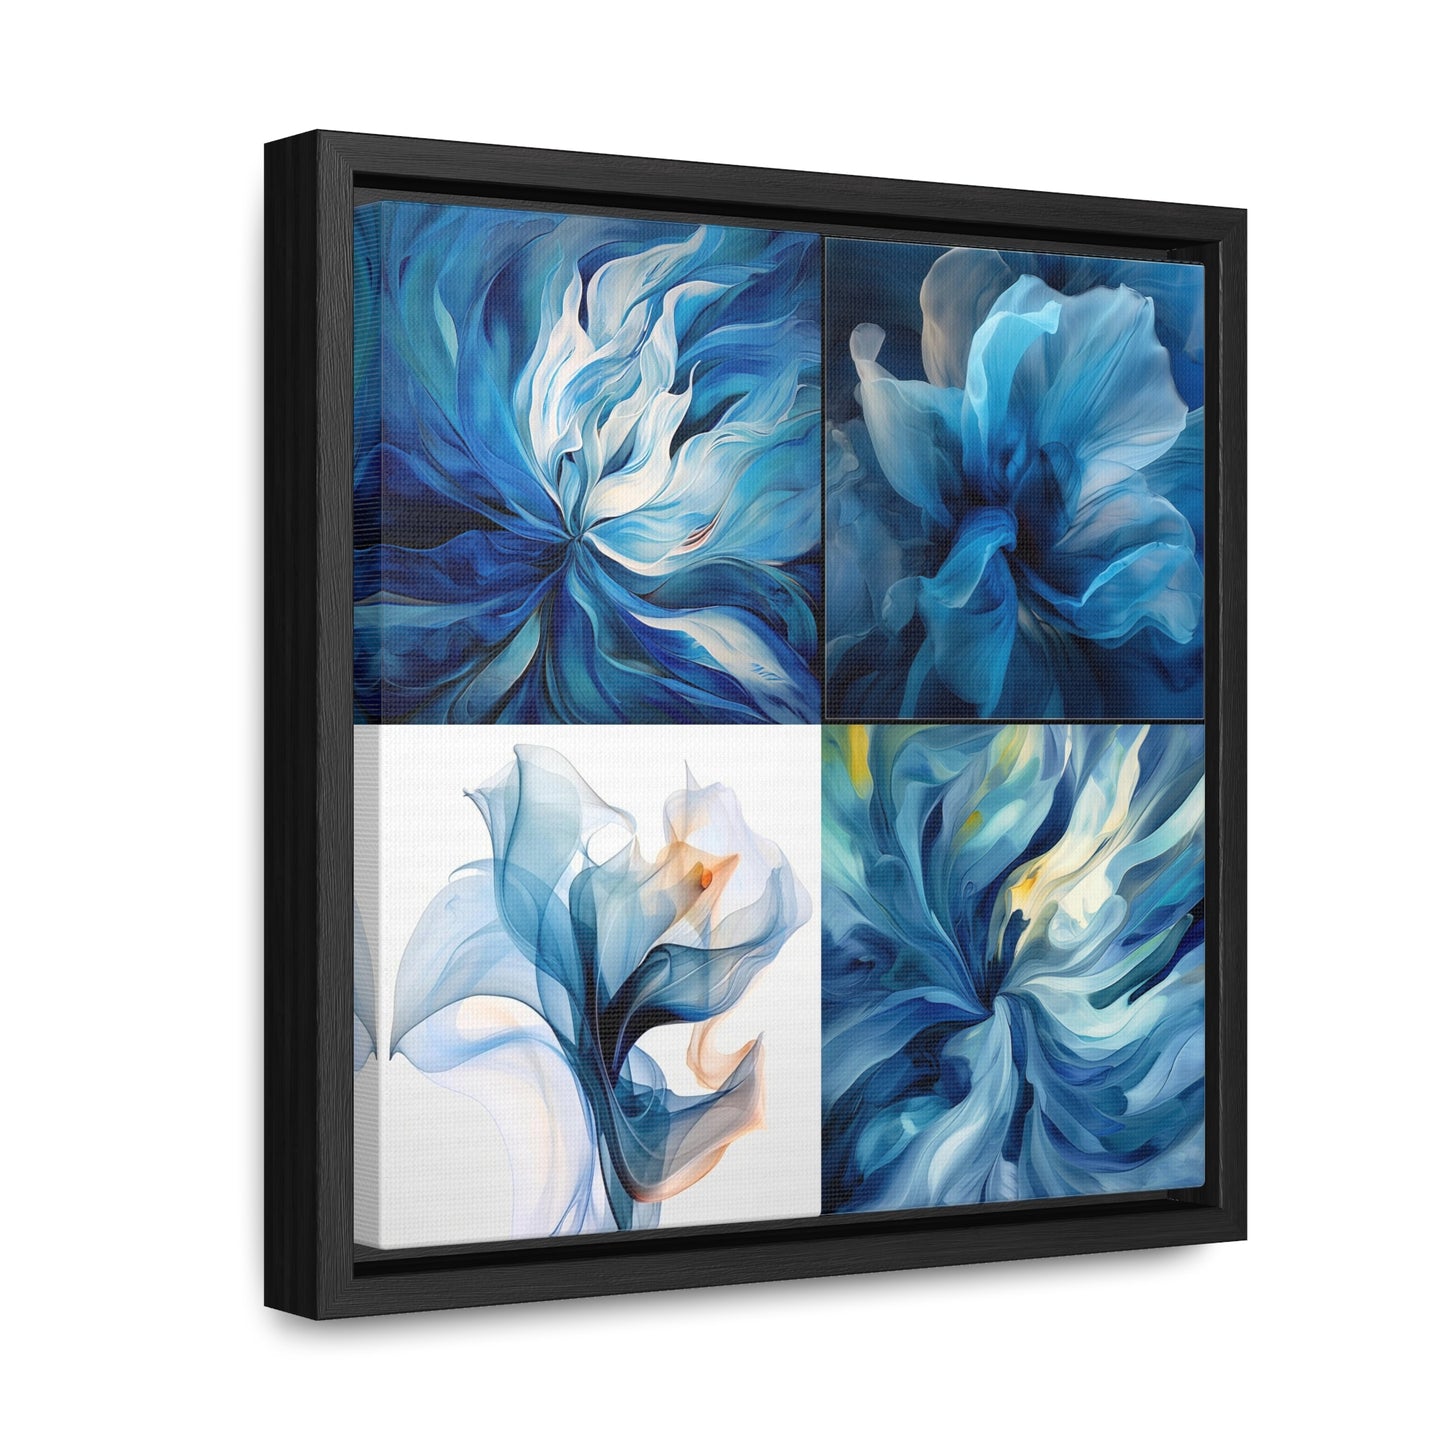 Gallery Canvas Wraps, Square Frame Blue Tluip Abstract 5